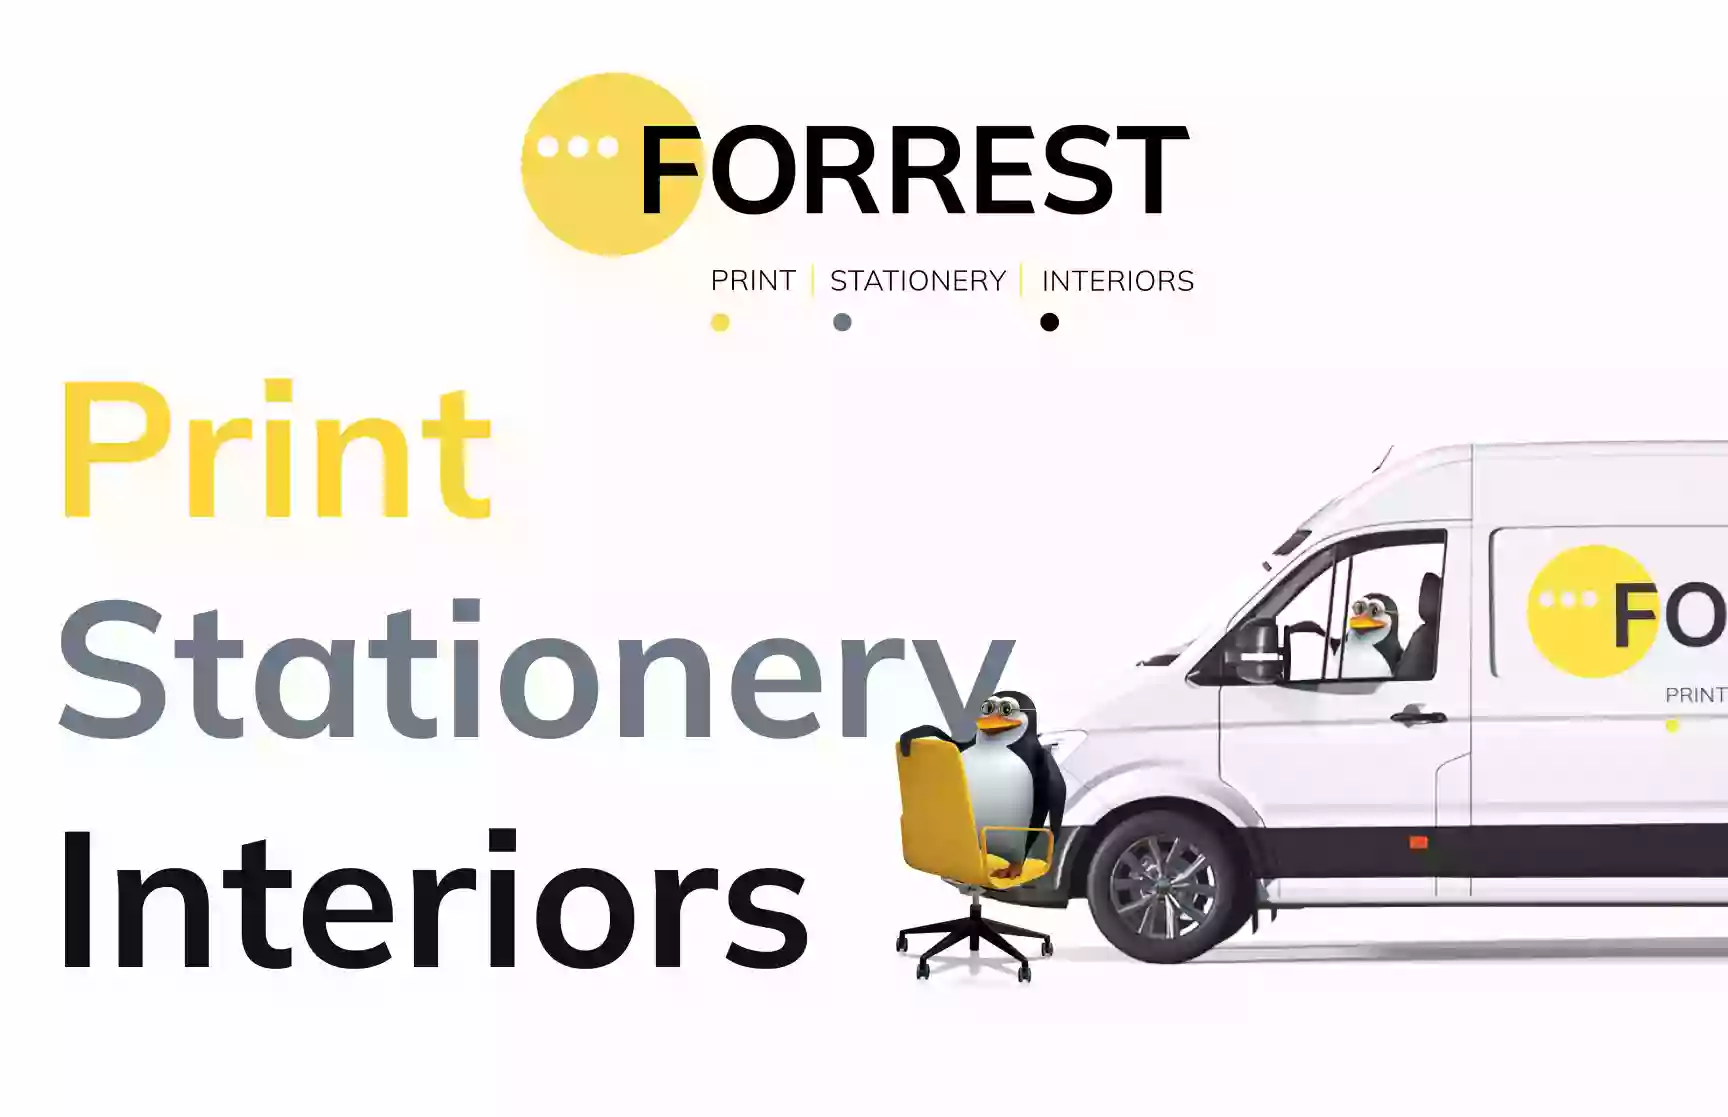 Forrest Print, Stationery and Interiors ltd.